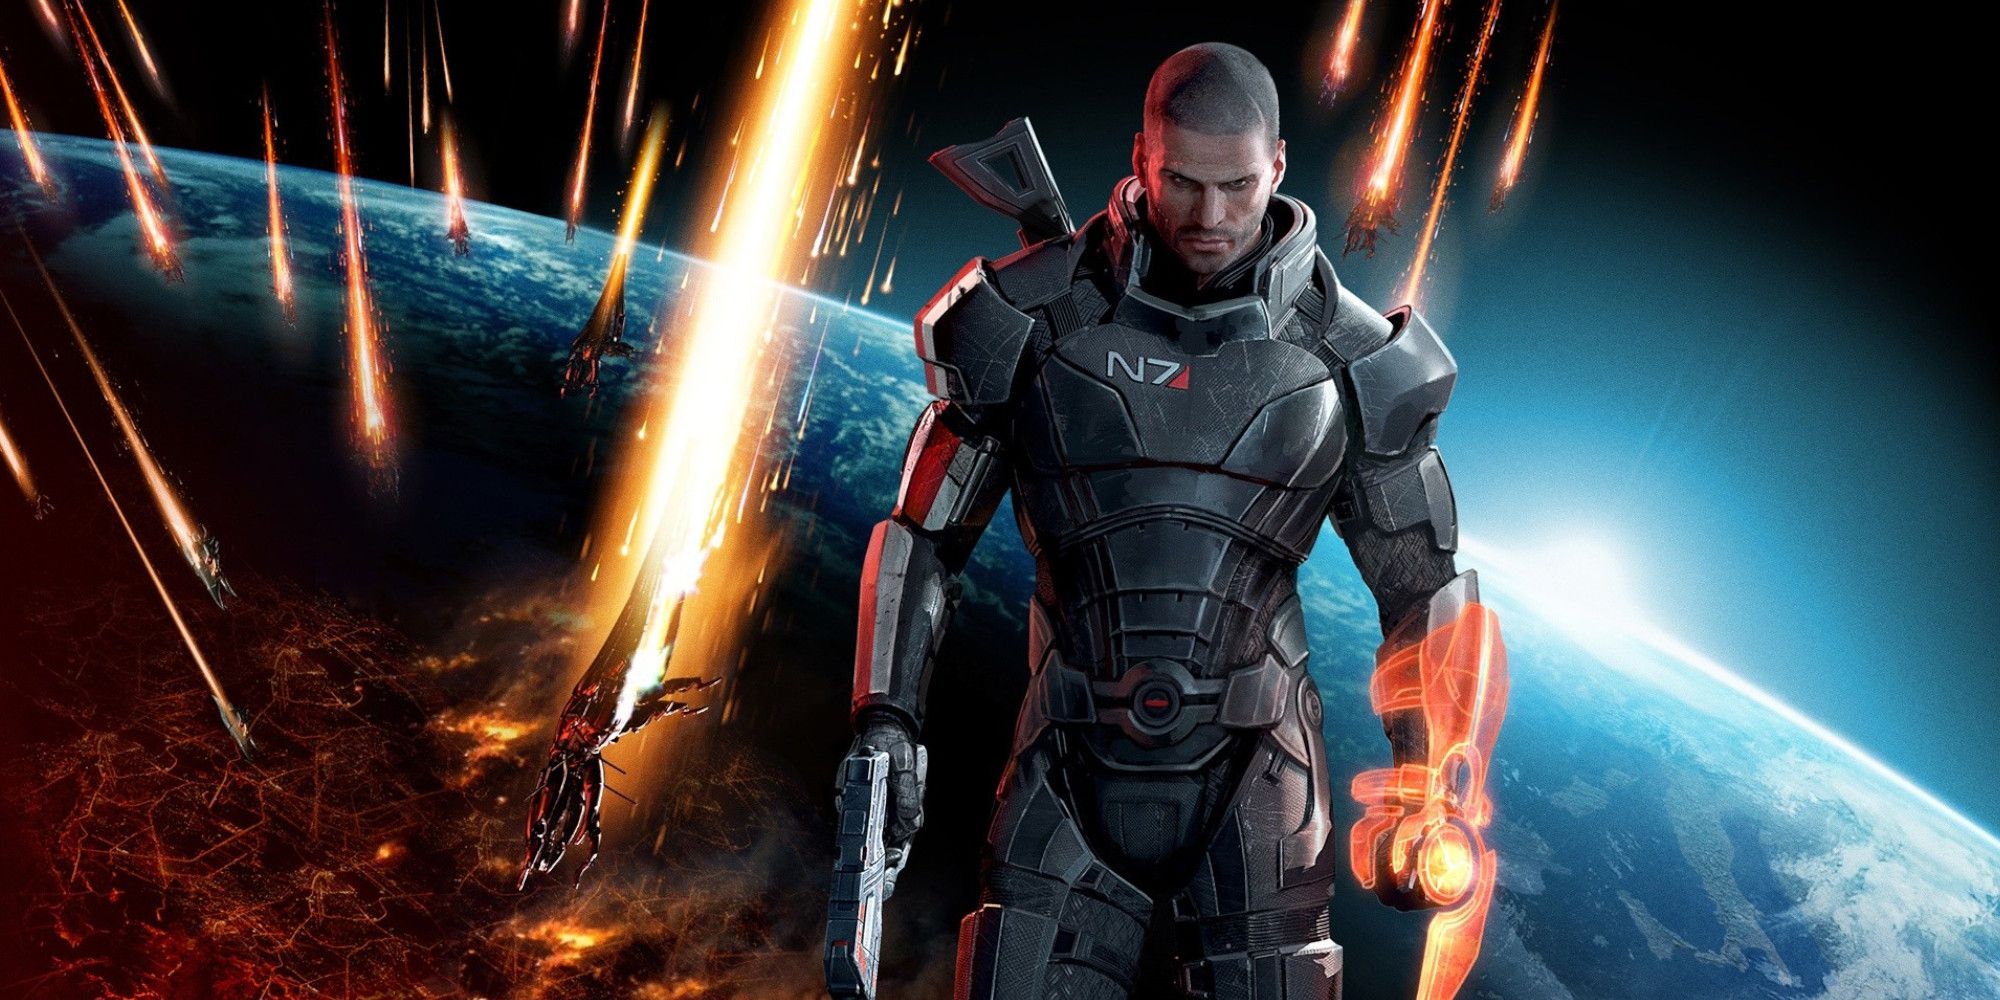 Commander Shepard poses; behind him, Reapers attack Earth